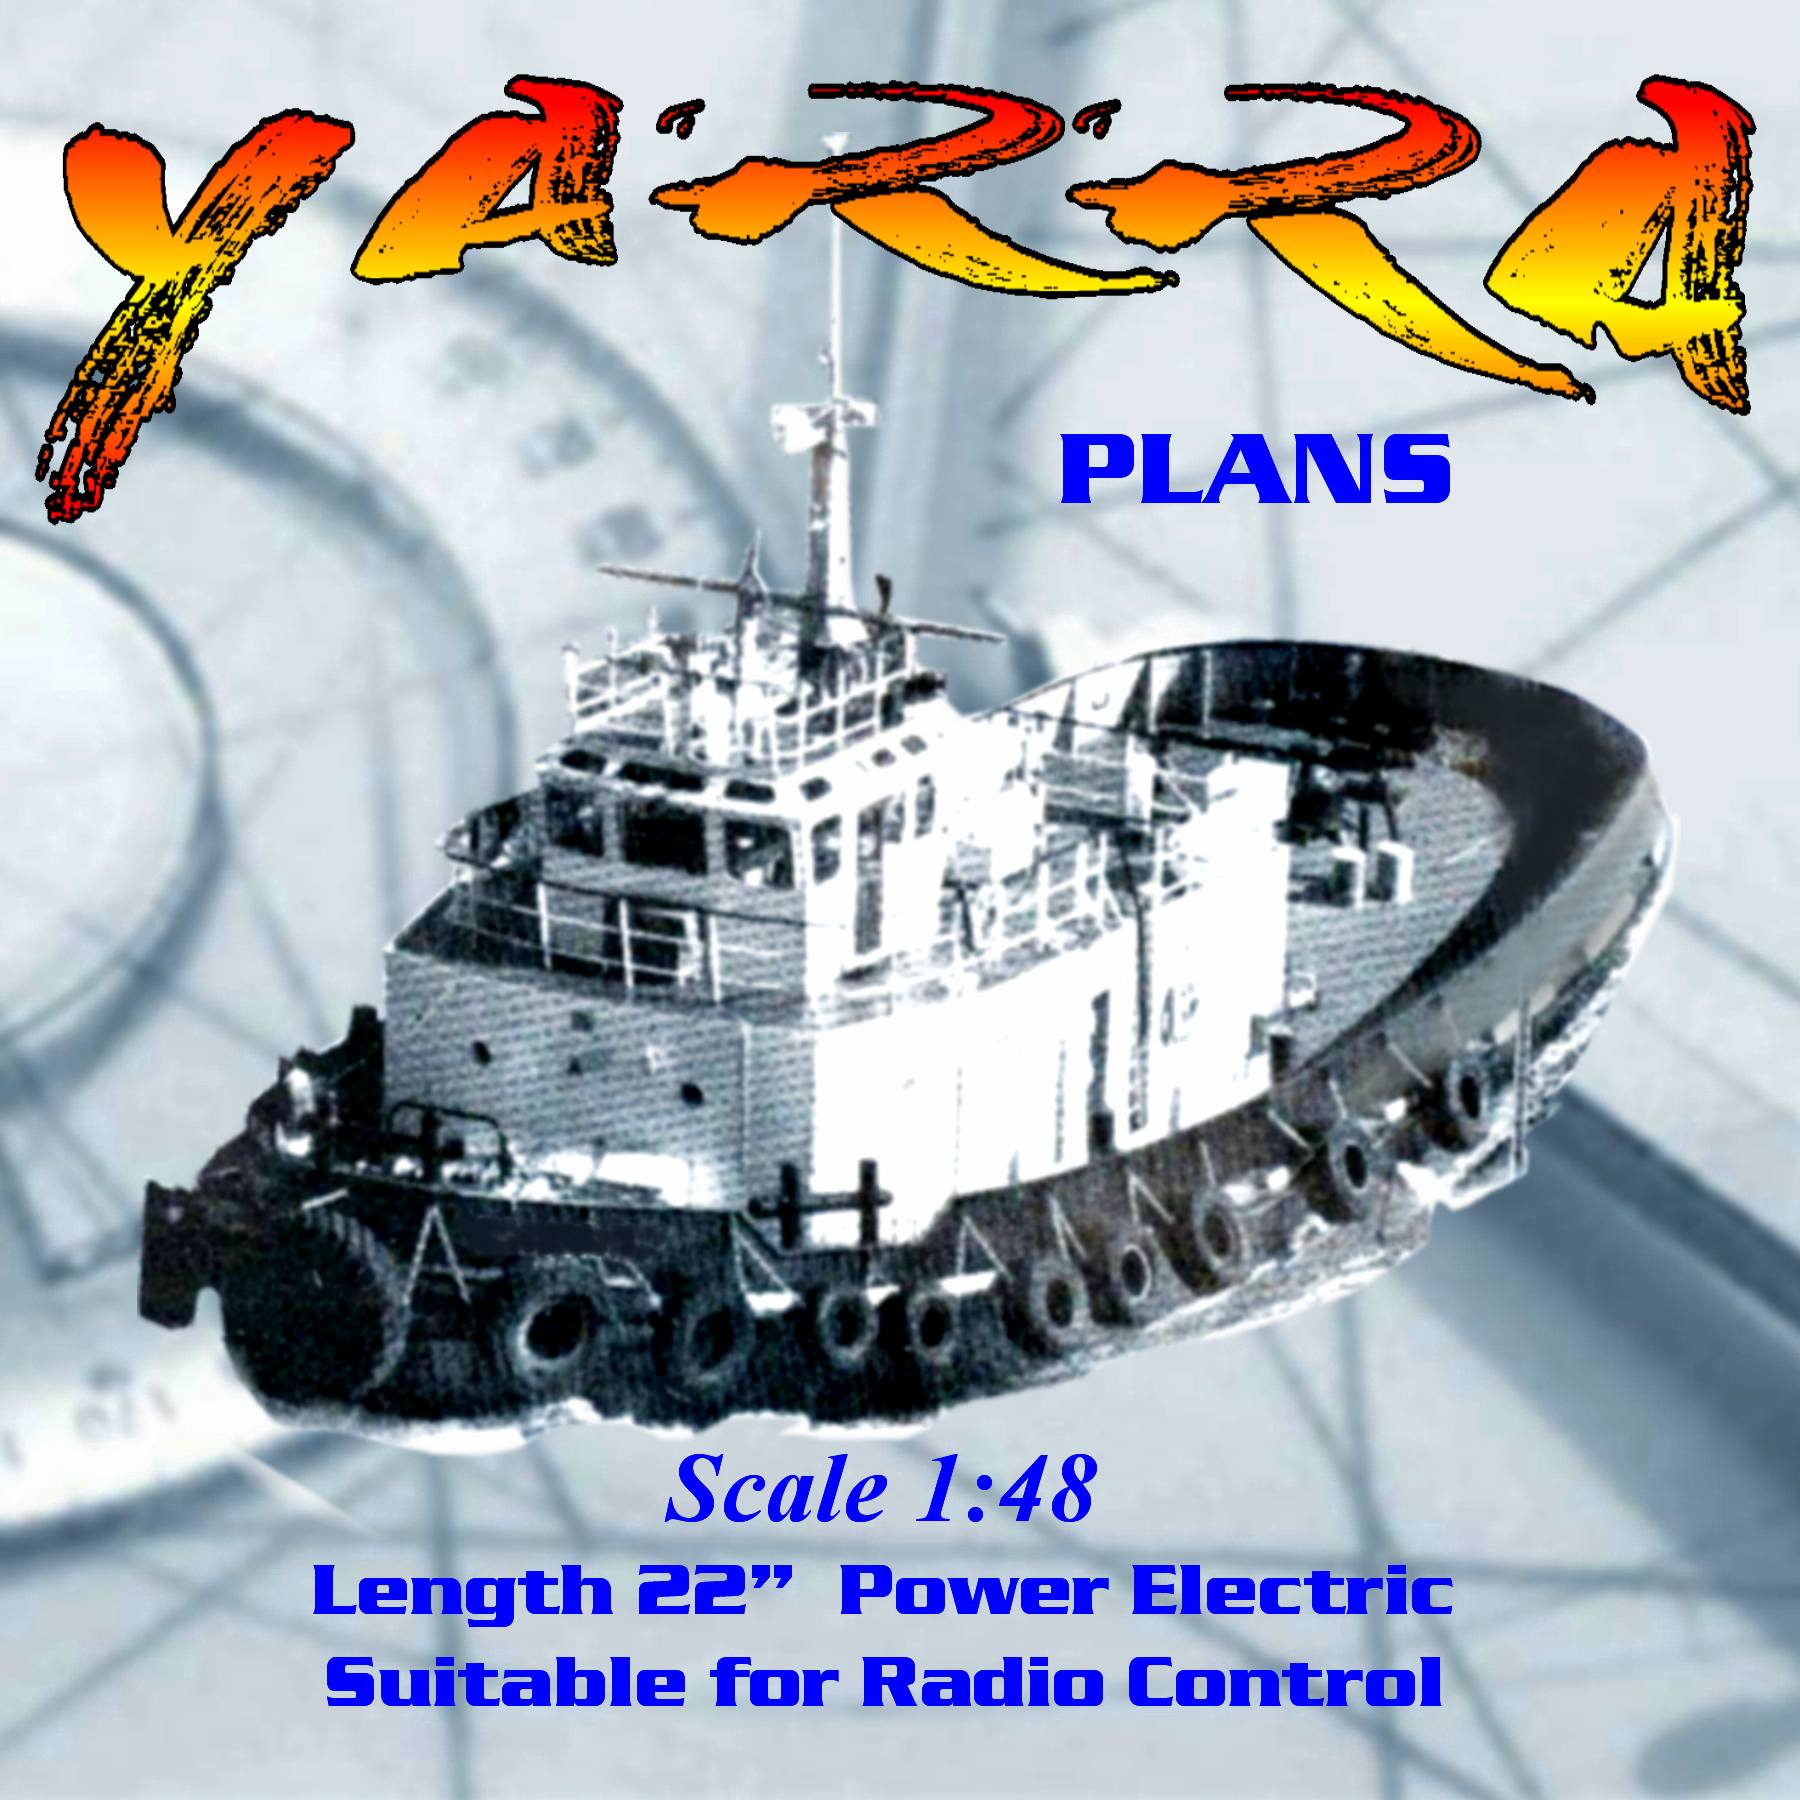 full size printed plan to build a scale 1:48 australian tug suitable for radio control